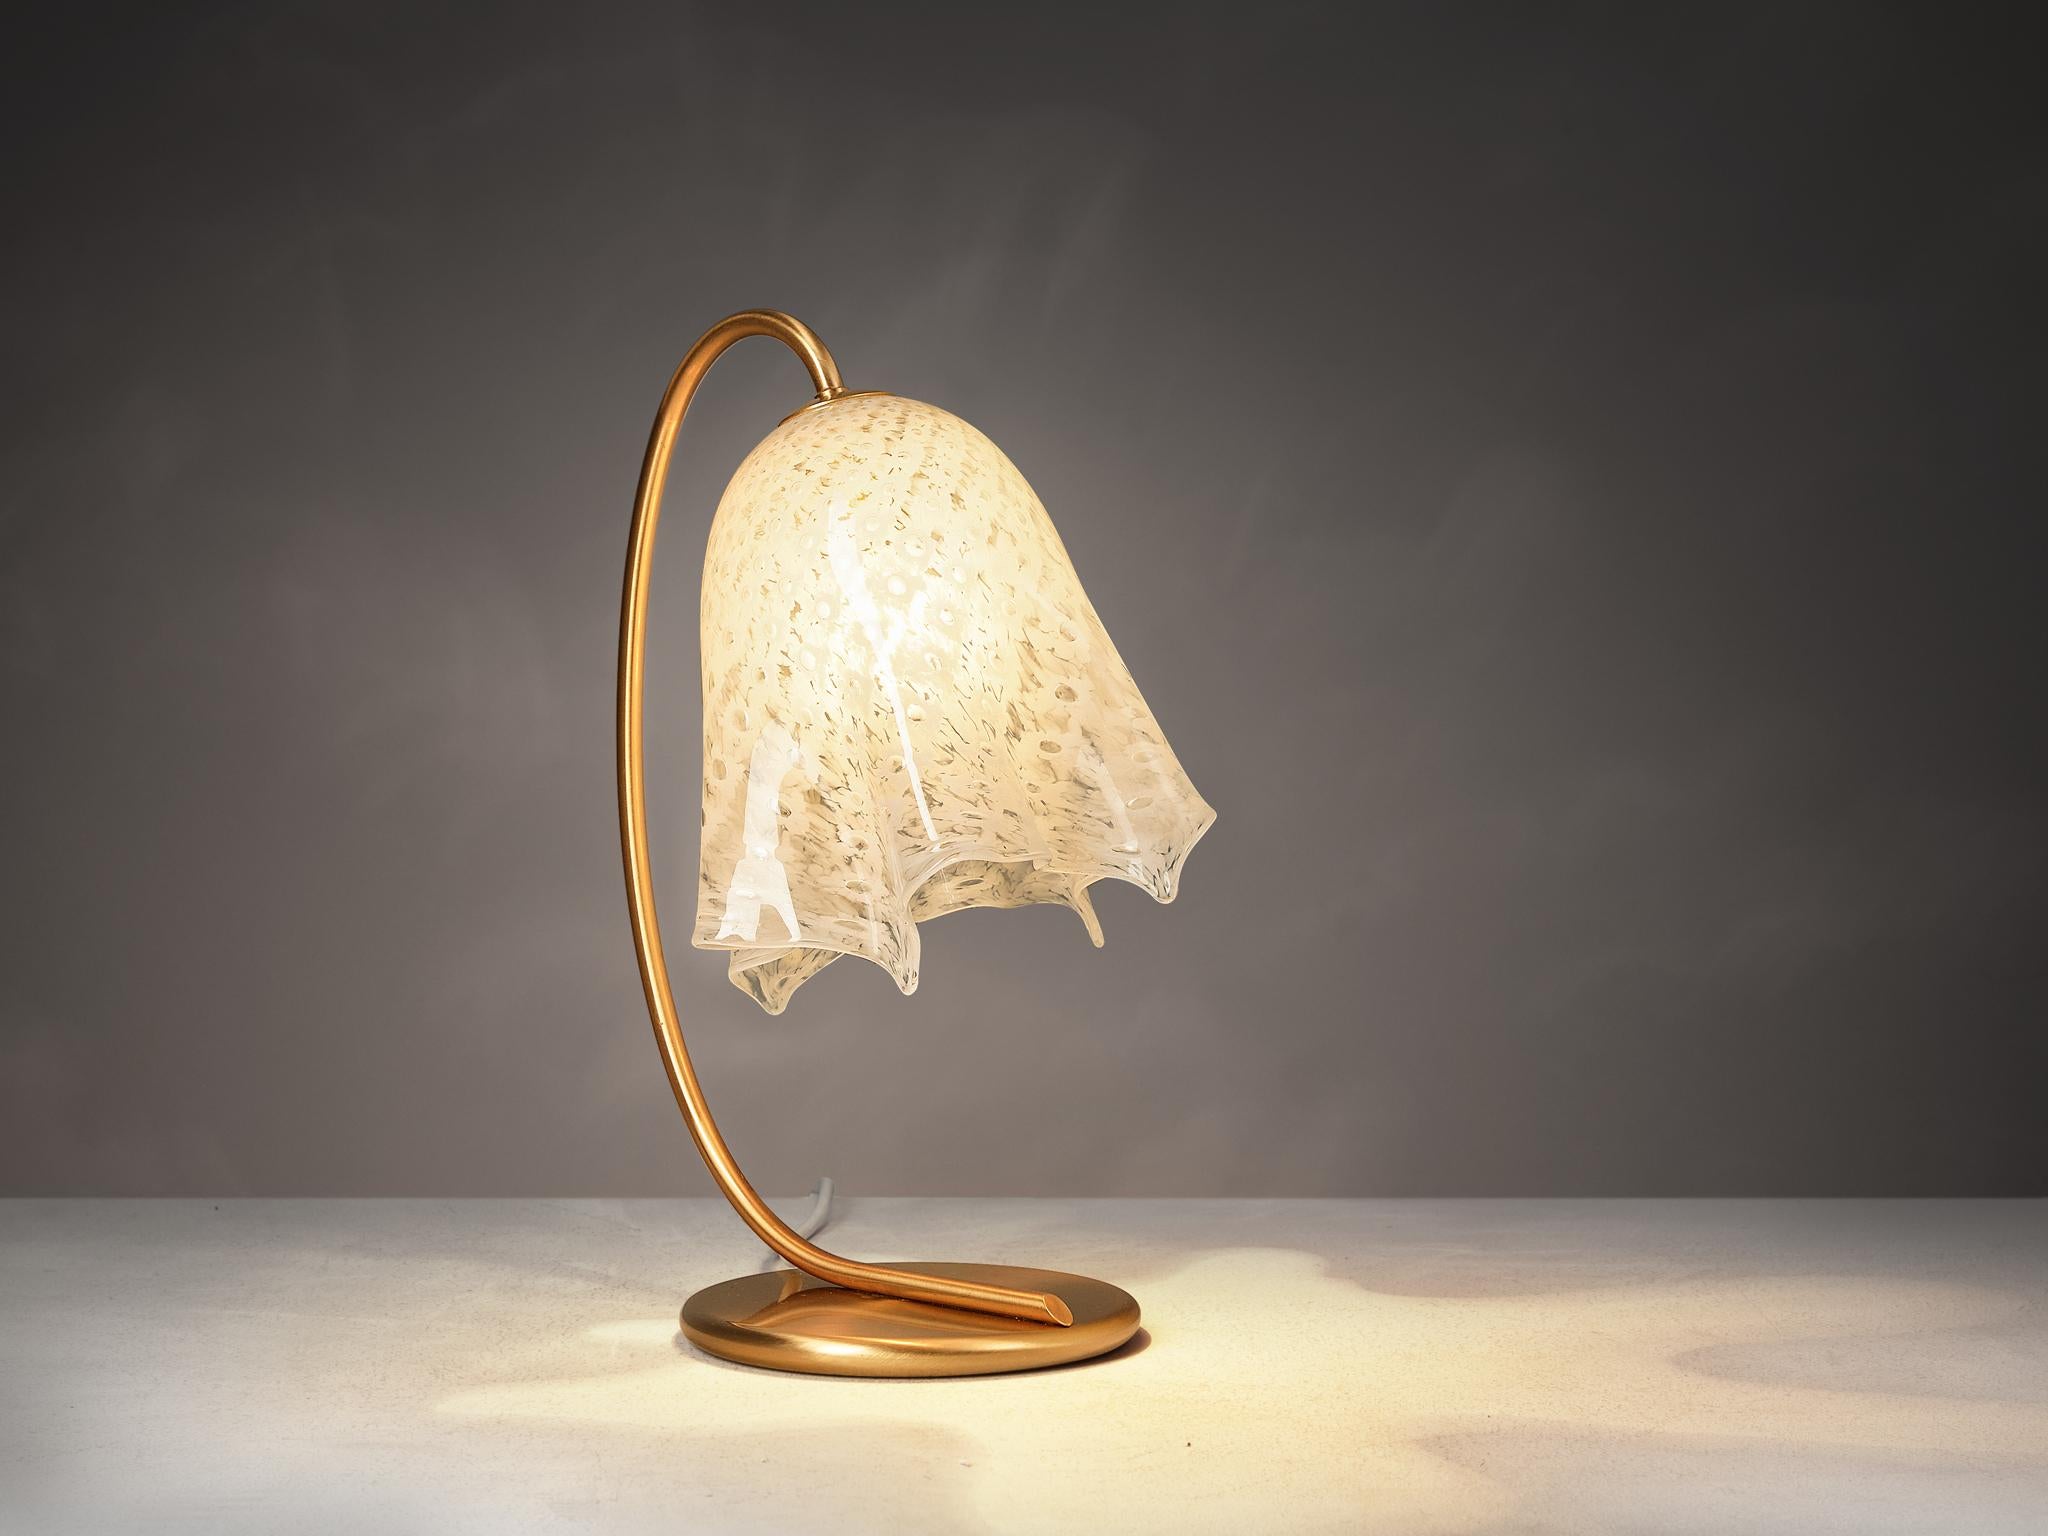 La Murrina, 'Fazzoletto' table lamp, Murano glass, brass-plated metal, Italy, 1970s

A gracious table lamp crafted by La Murrina in Murano during the 1970s, the Fazzoletto earns its name from its elegantly draped lampshade, resembling a